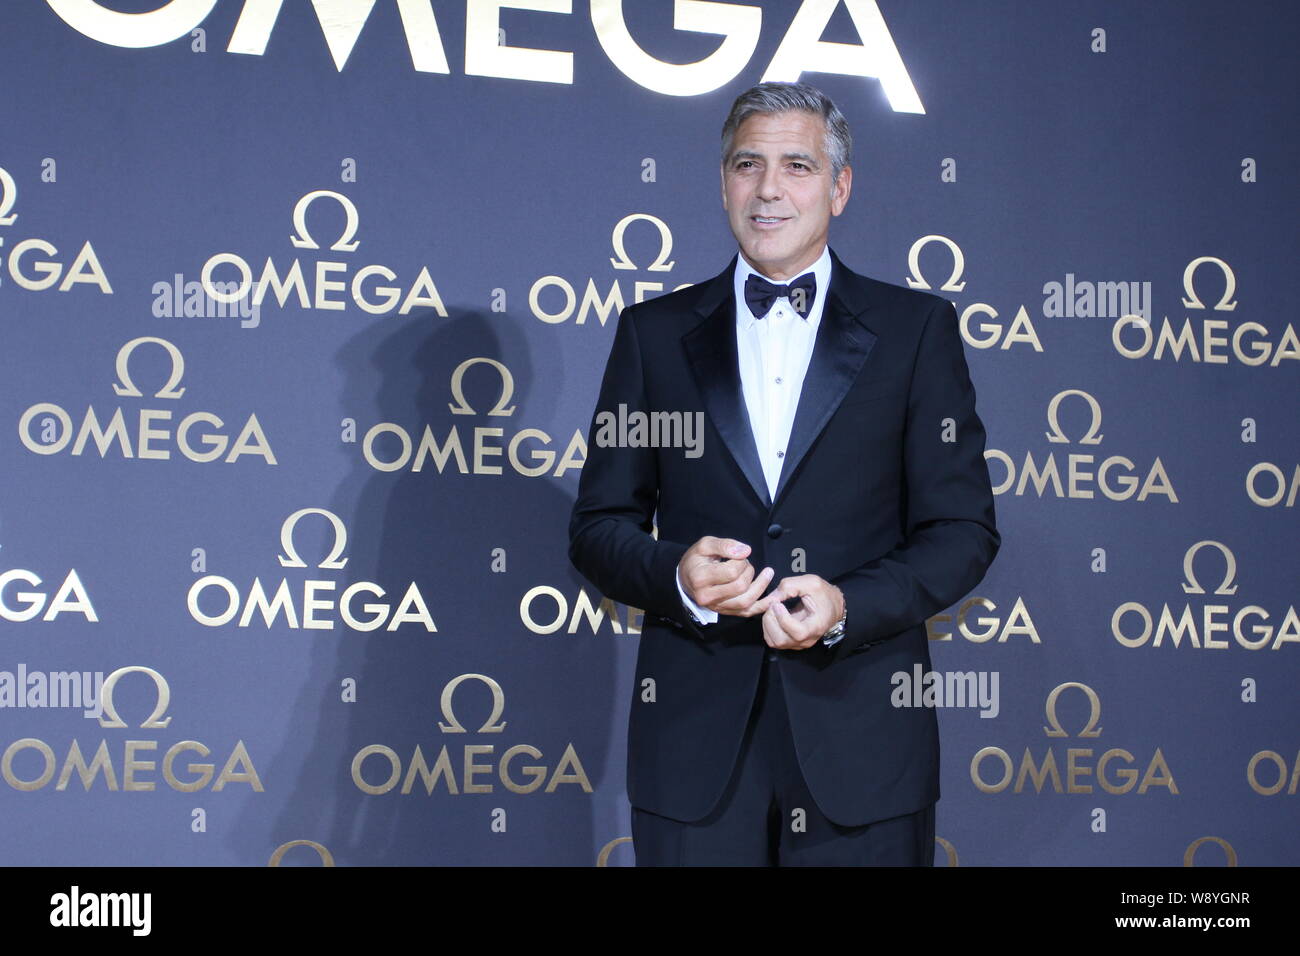 American actor George Clooney poses as he arrives at the Omega Le Jardin Secret party in Shanghai, China, 16 May 2014.   Hollywood actor George Cloone Stock Photo